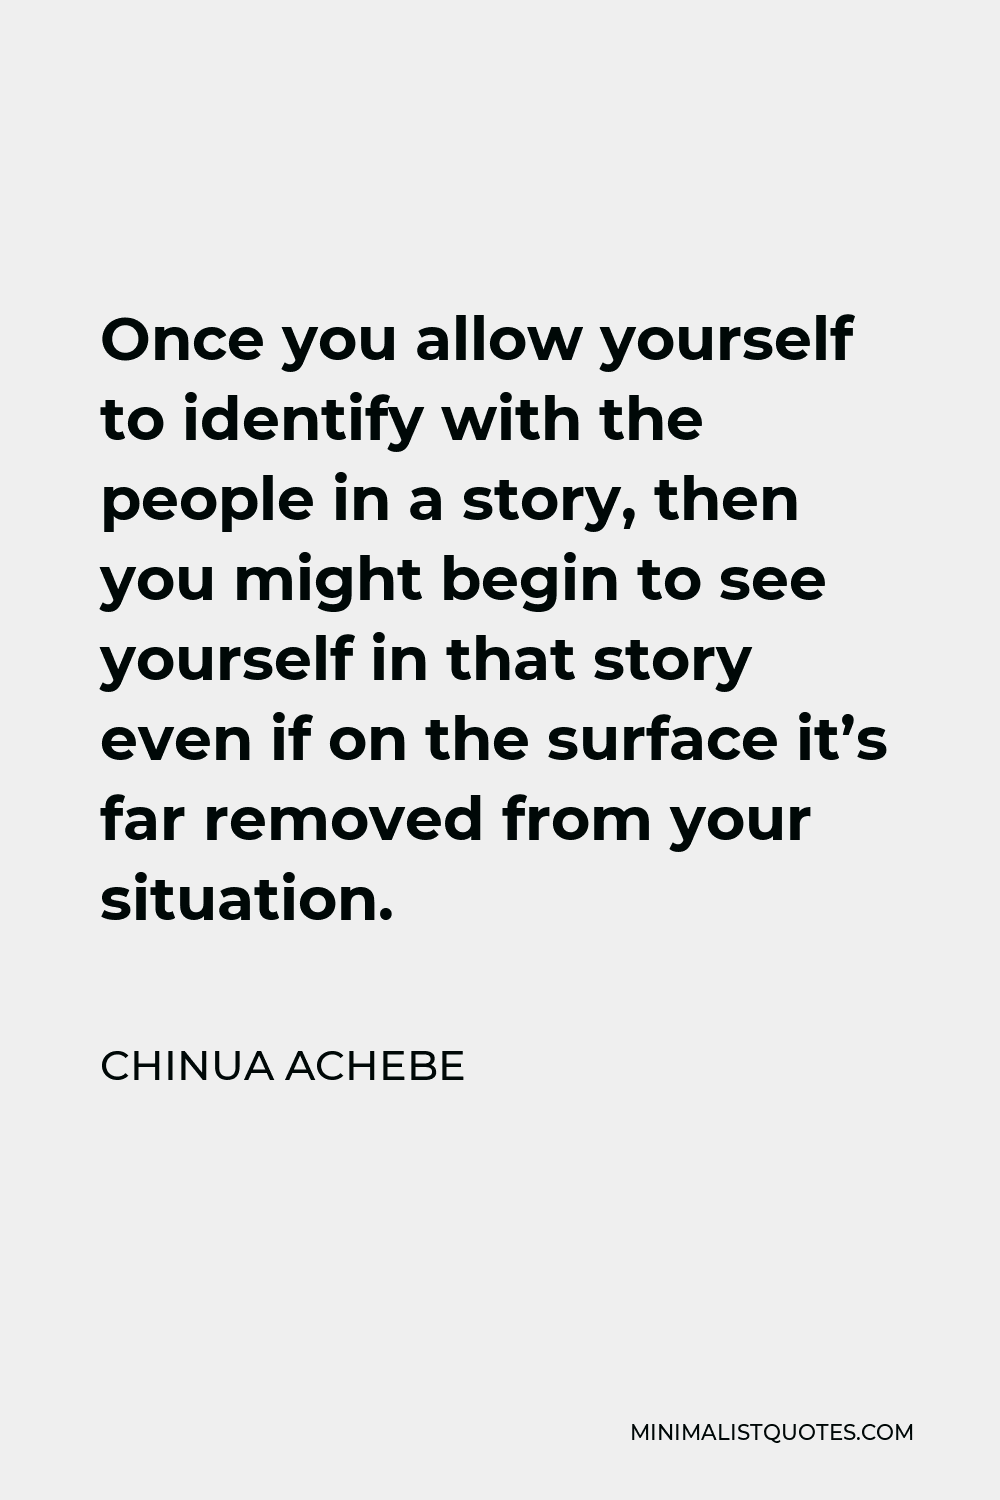 Chinua Achebe Quote - Once you allow yourself to identify with the people in a story, then you might begin to see yourself in that story even if on the surface it’s far removed from your situation.